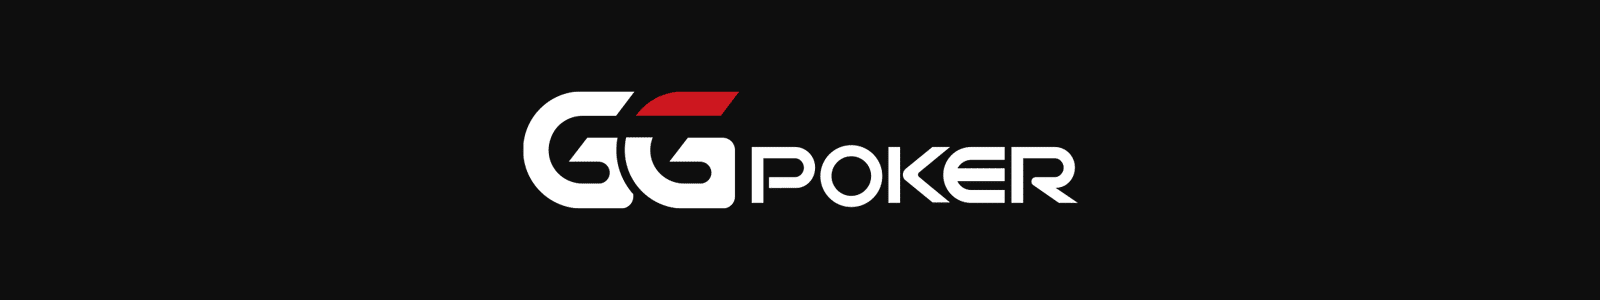 Online Poker | Play The Worlds Biggest Poker Room at GGPoker